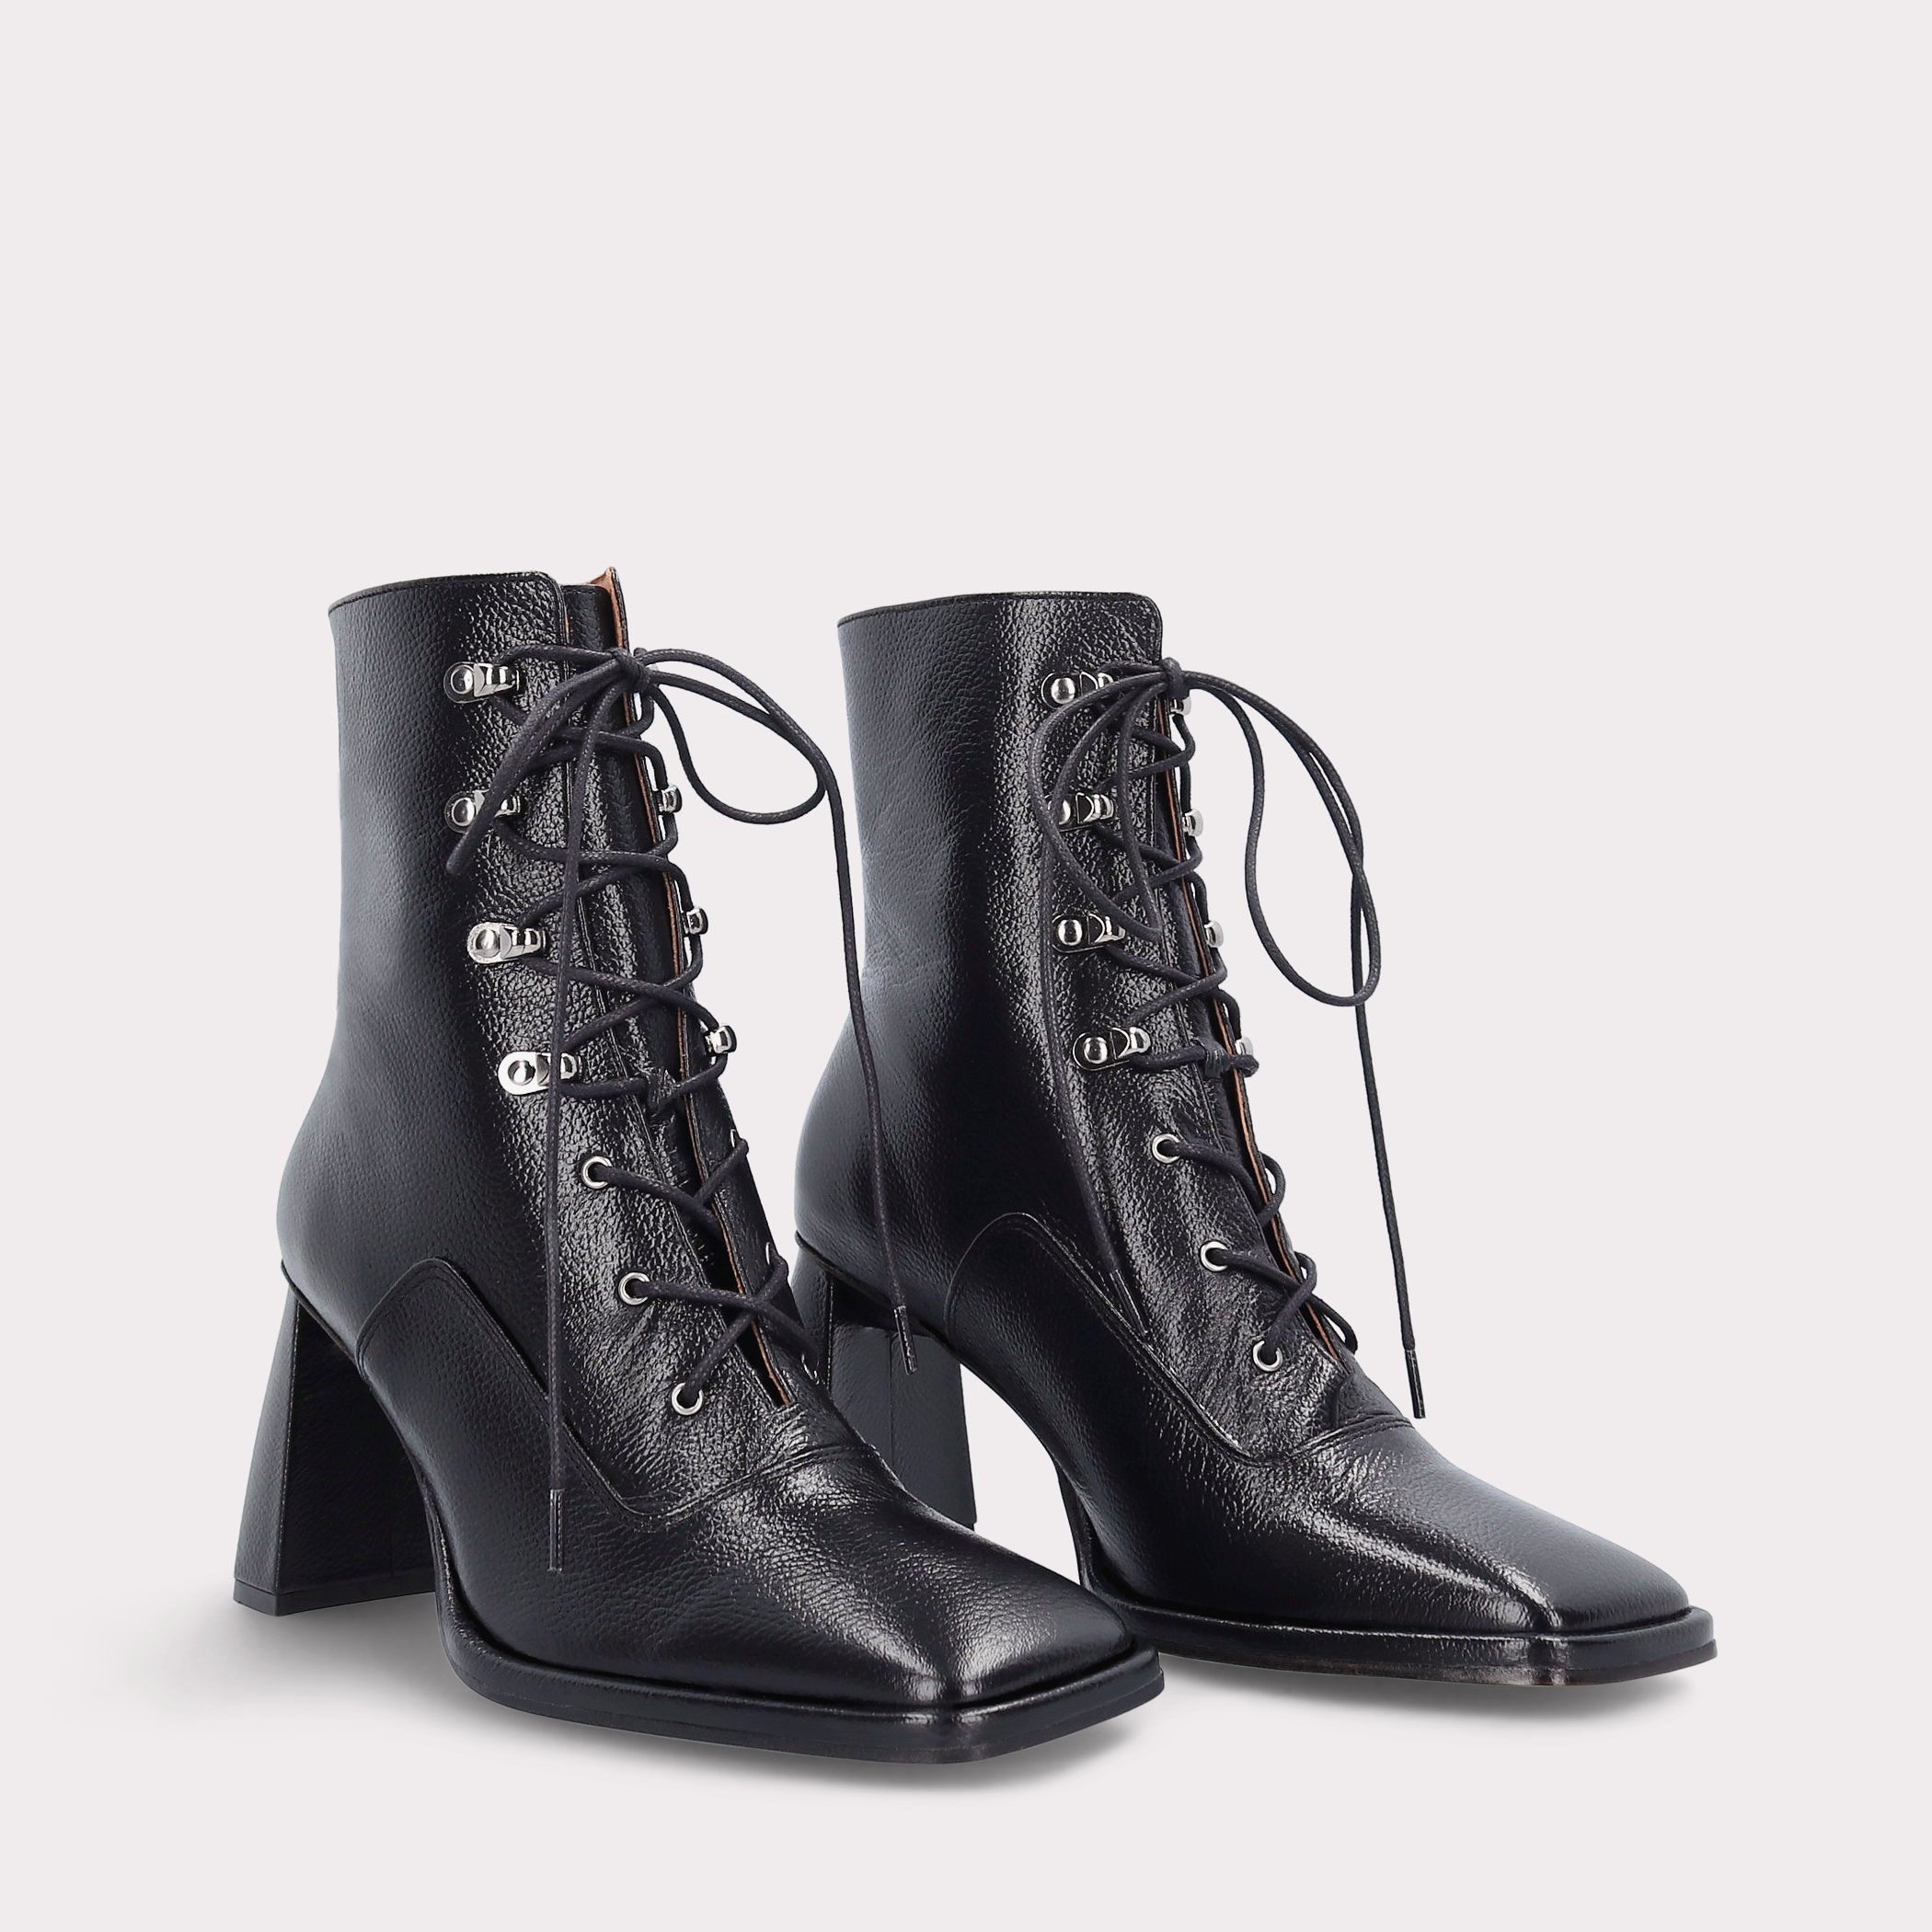 BRENTA 02 BLACK GRAIN LEATHER ANKLE BOOTS